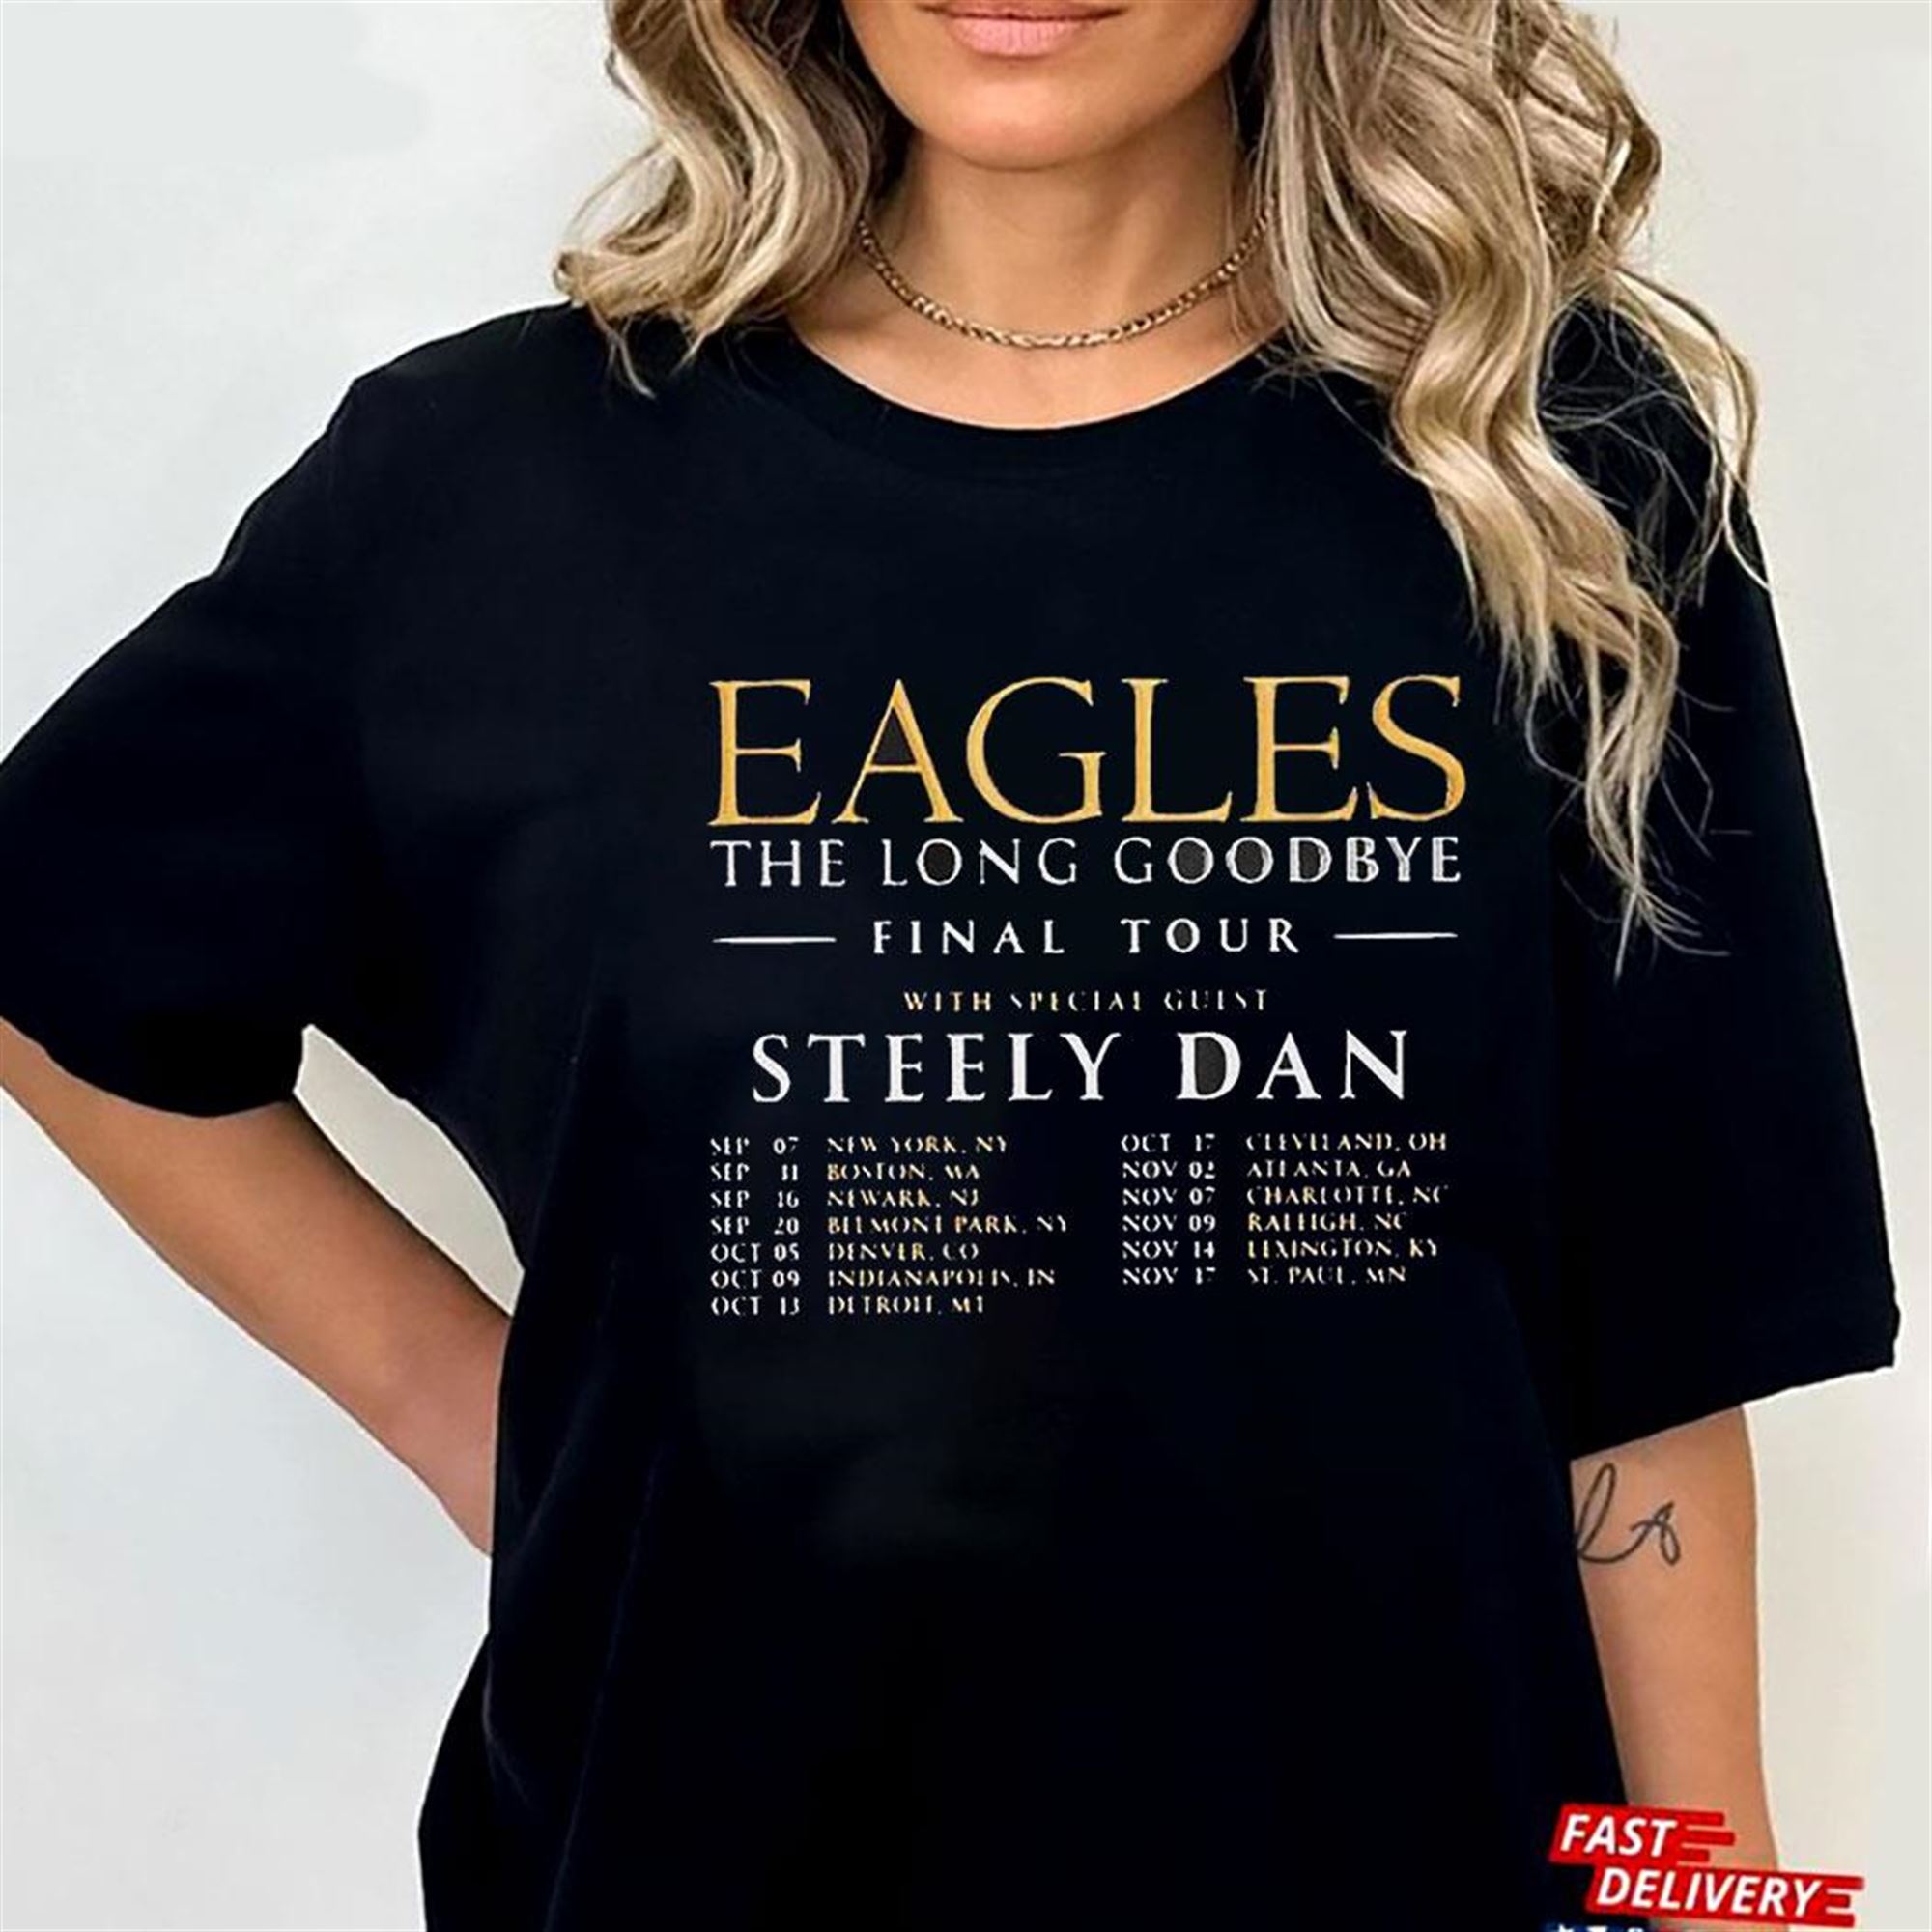 Eagles Band Tour 2023 The Long Goodbye With Special Guest Steely